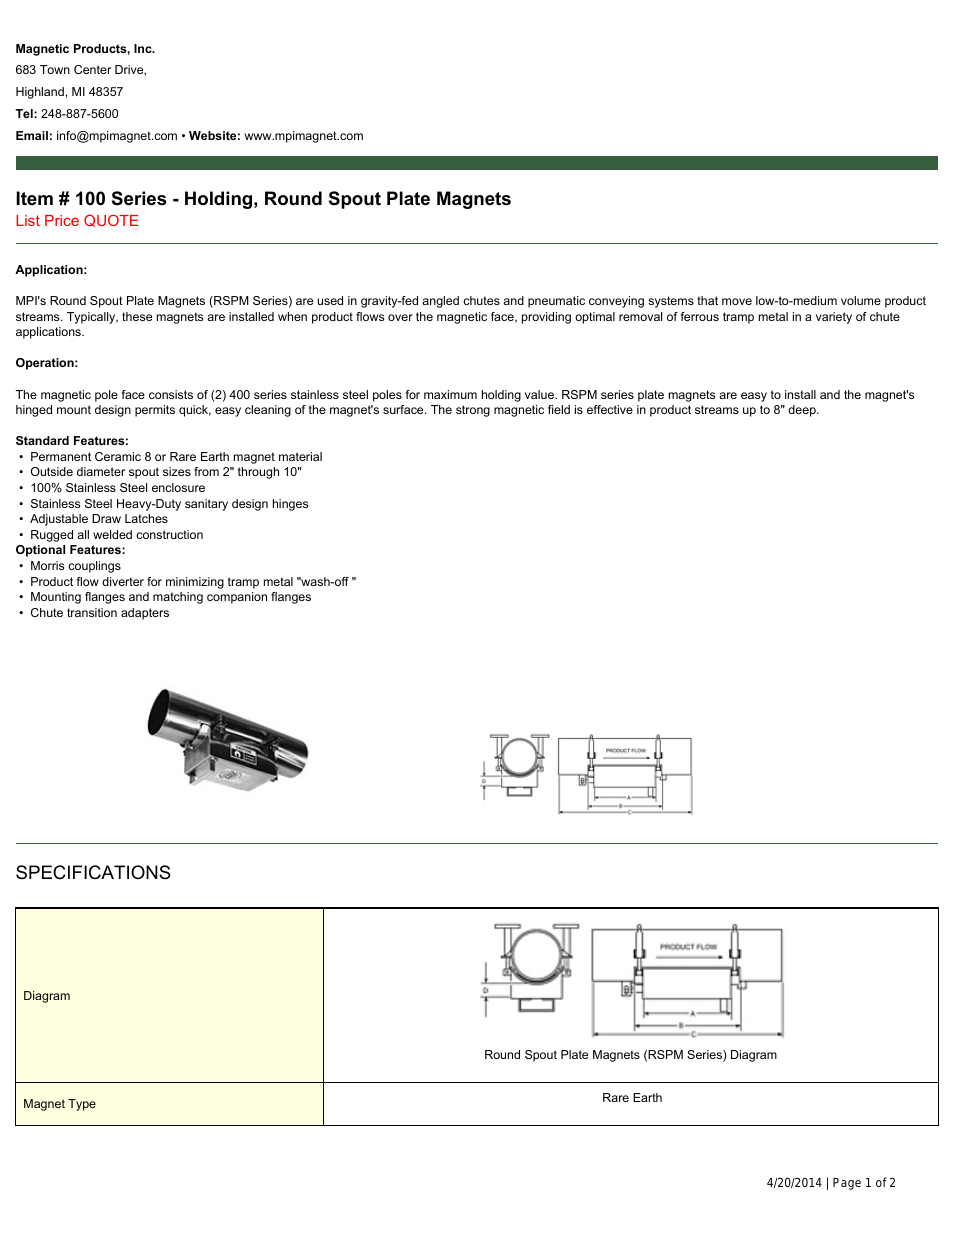 100 Series - Holding, Round Spout Plate Magnets